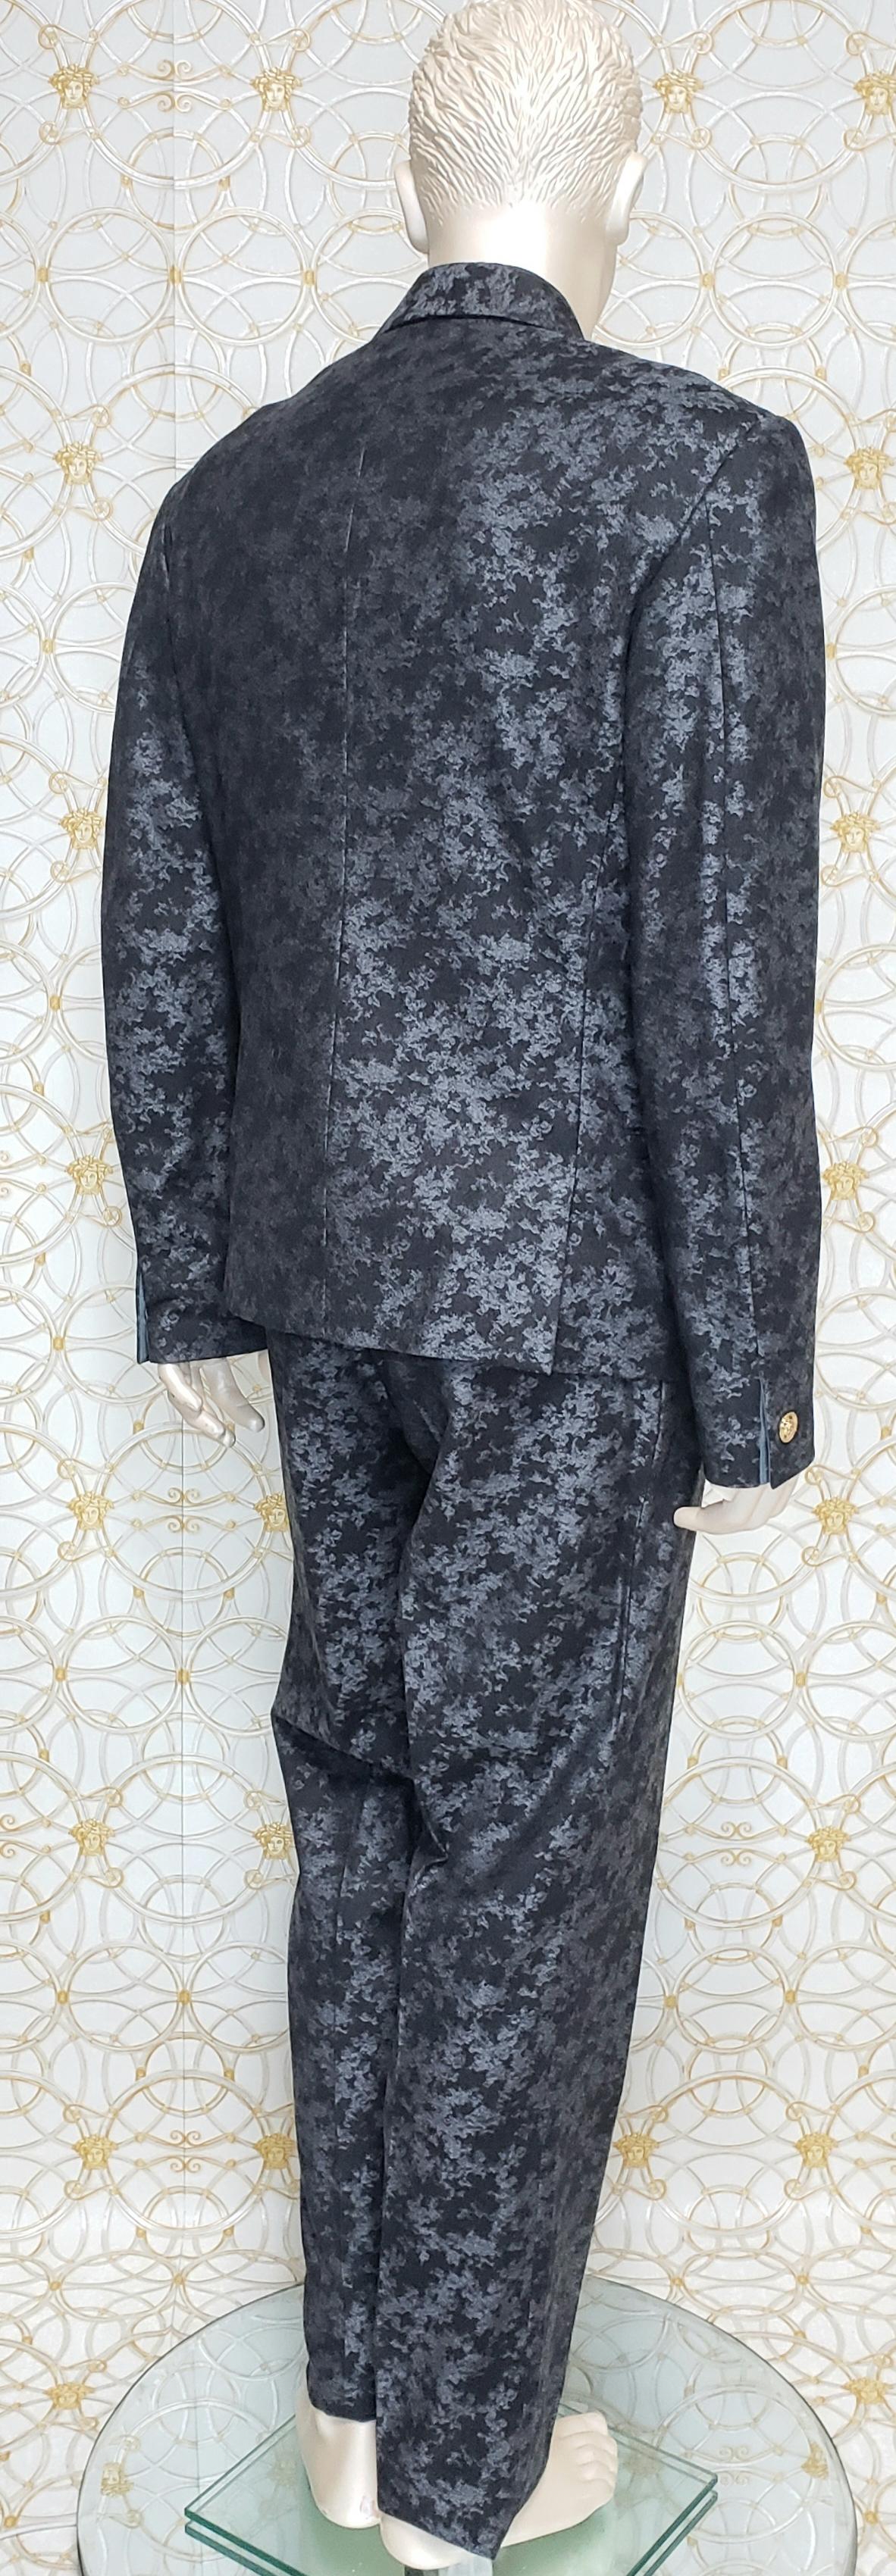 Gray FALL/WINTER 2012 look # 16, 22 BRAND NEW VERSACE GRAY SUIT 48 - 38 (M)